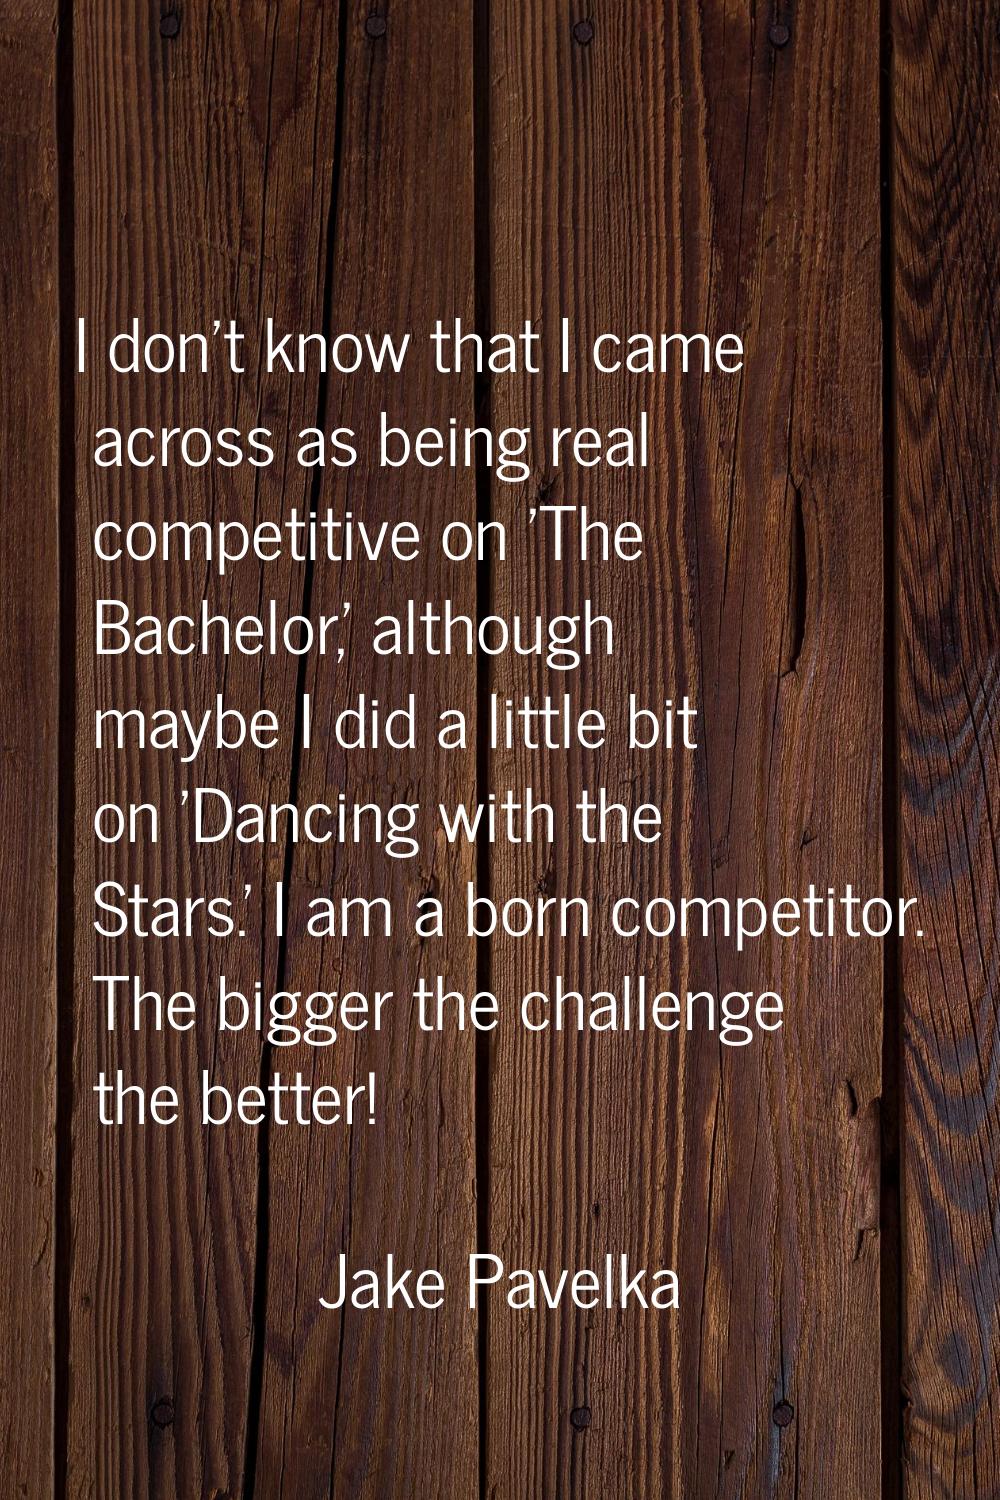 I don't know that I came across as being real competitive on 'The Bachelor,' although maybe I did a